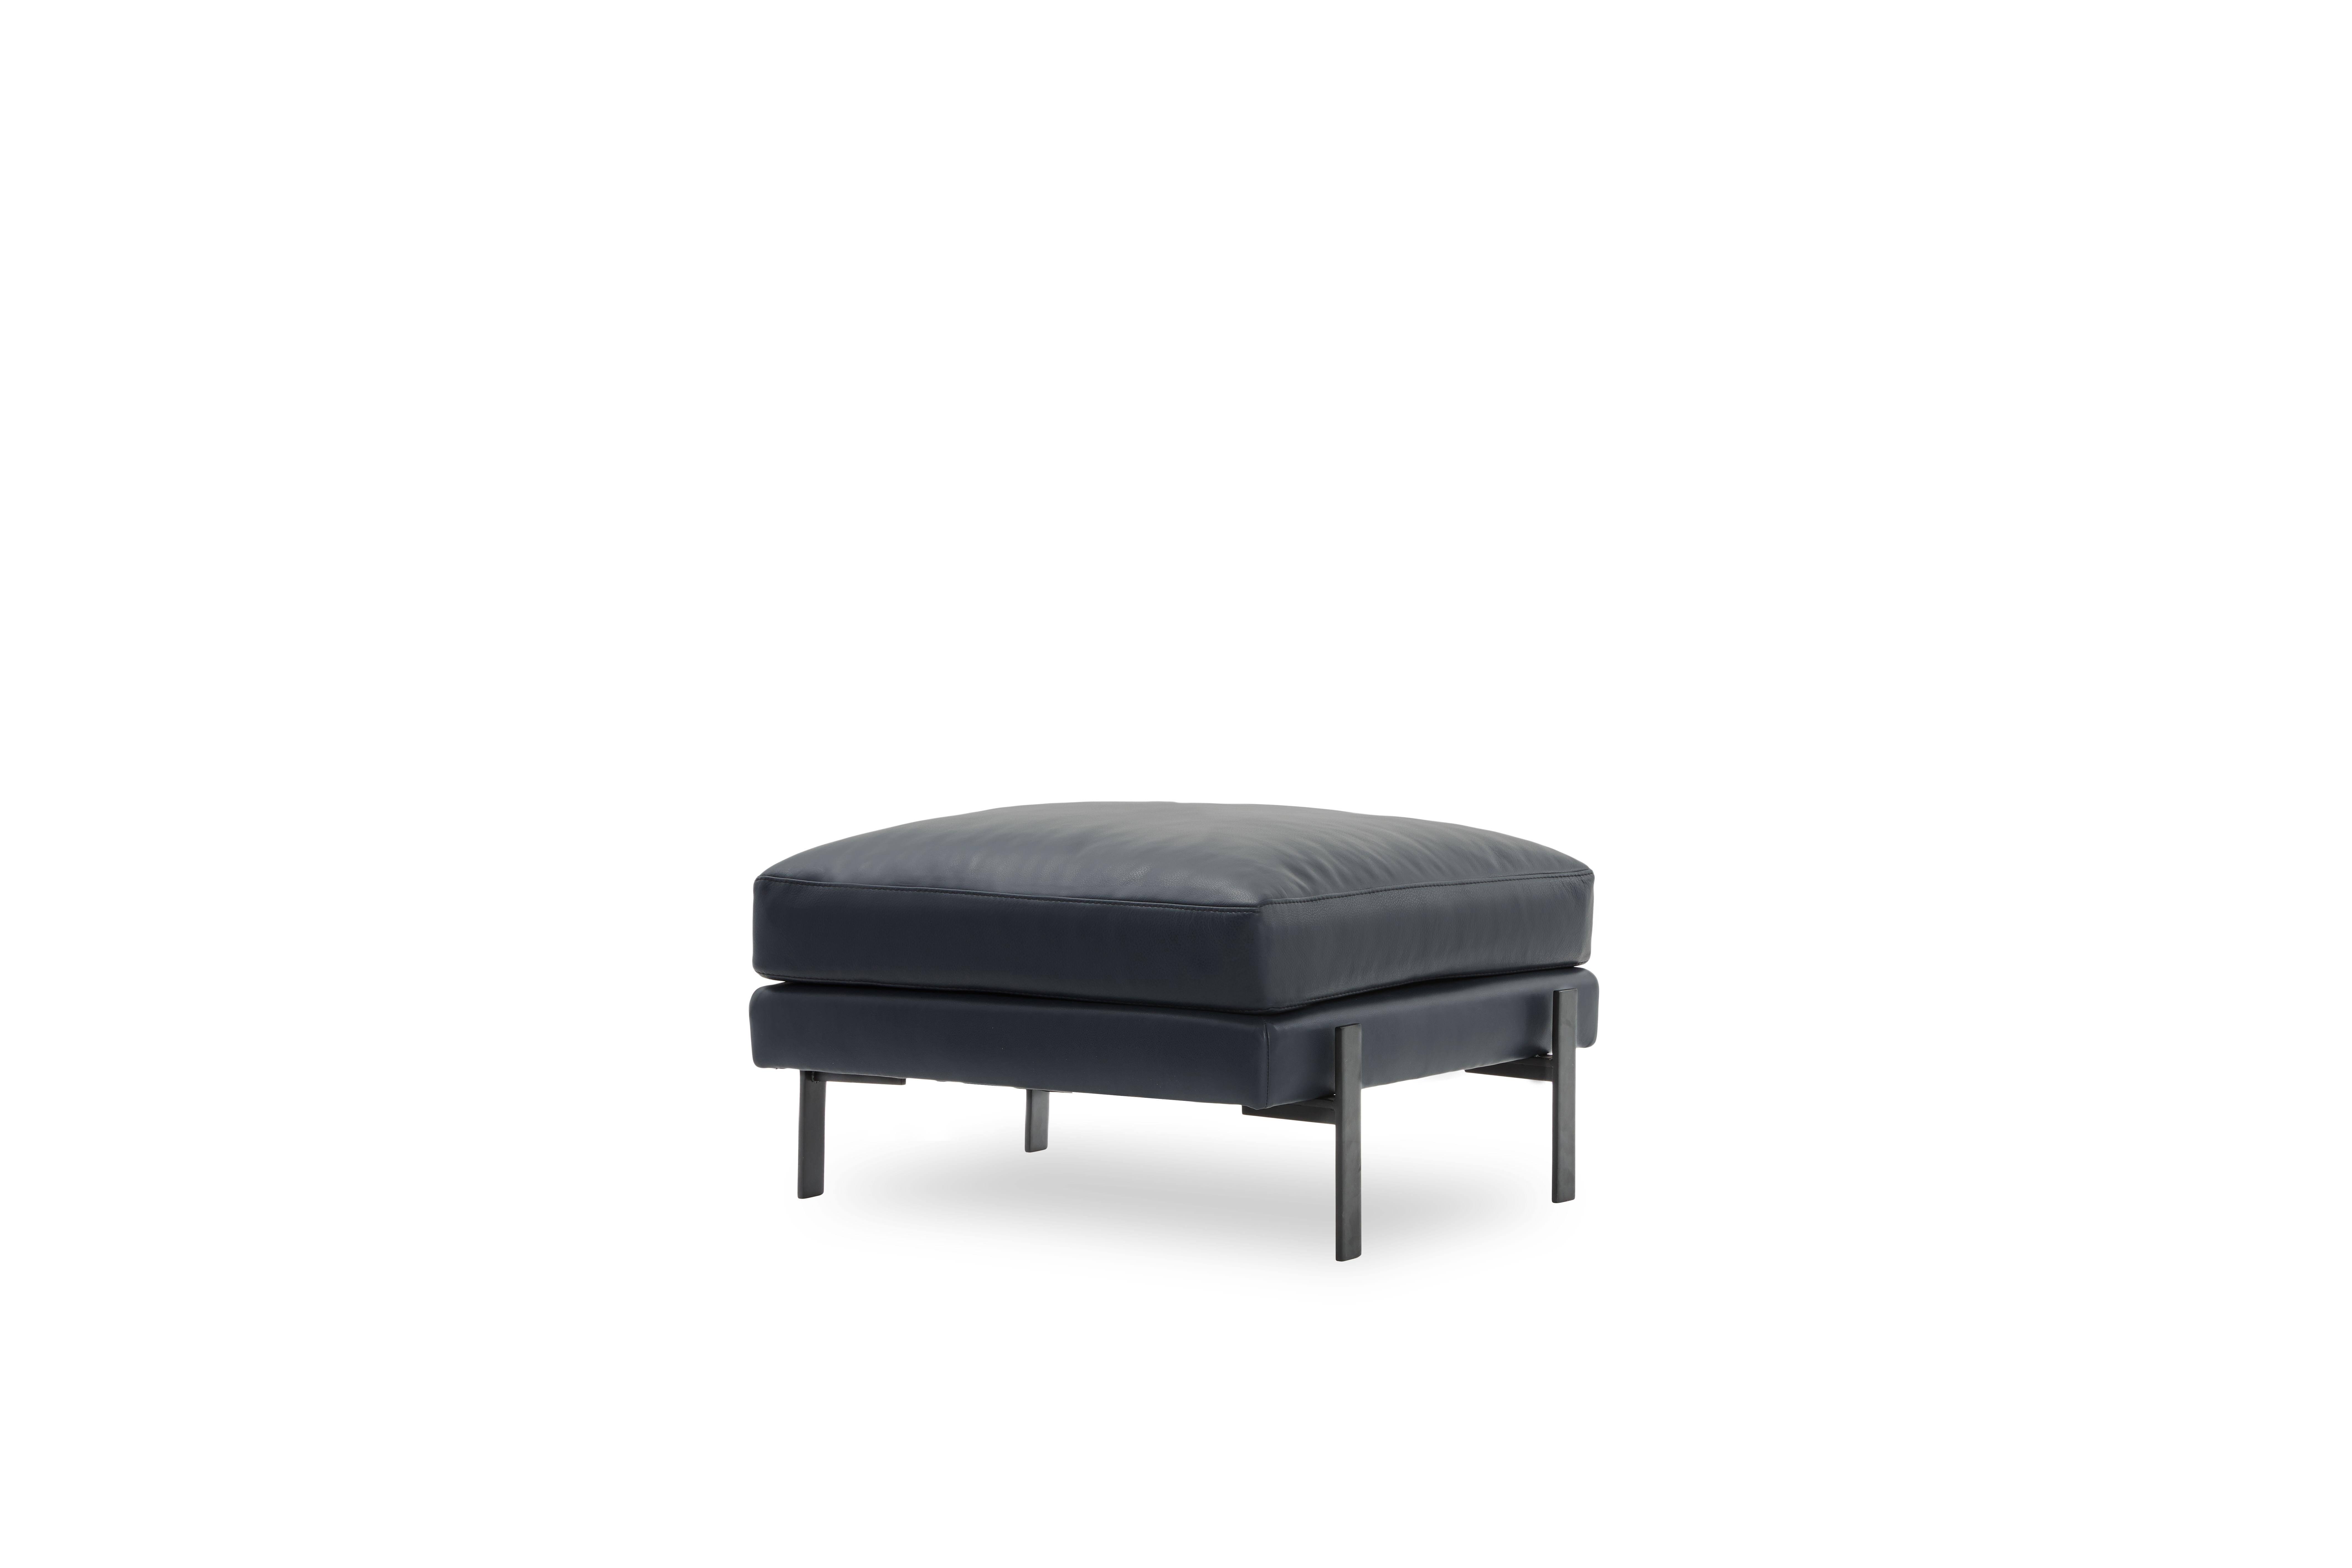 The Truss ottoman combines an elegant, yet practical design with a lean, refined profile that spares no expense to comfort. Pictured above in Midnight Leather, the Truss line is available in a range of carefully-chosen upholstery options including